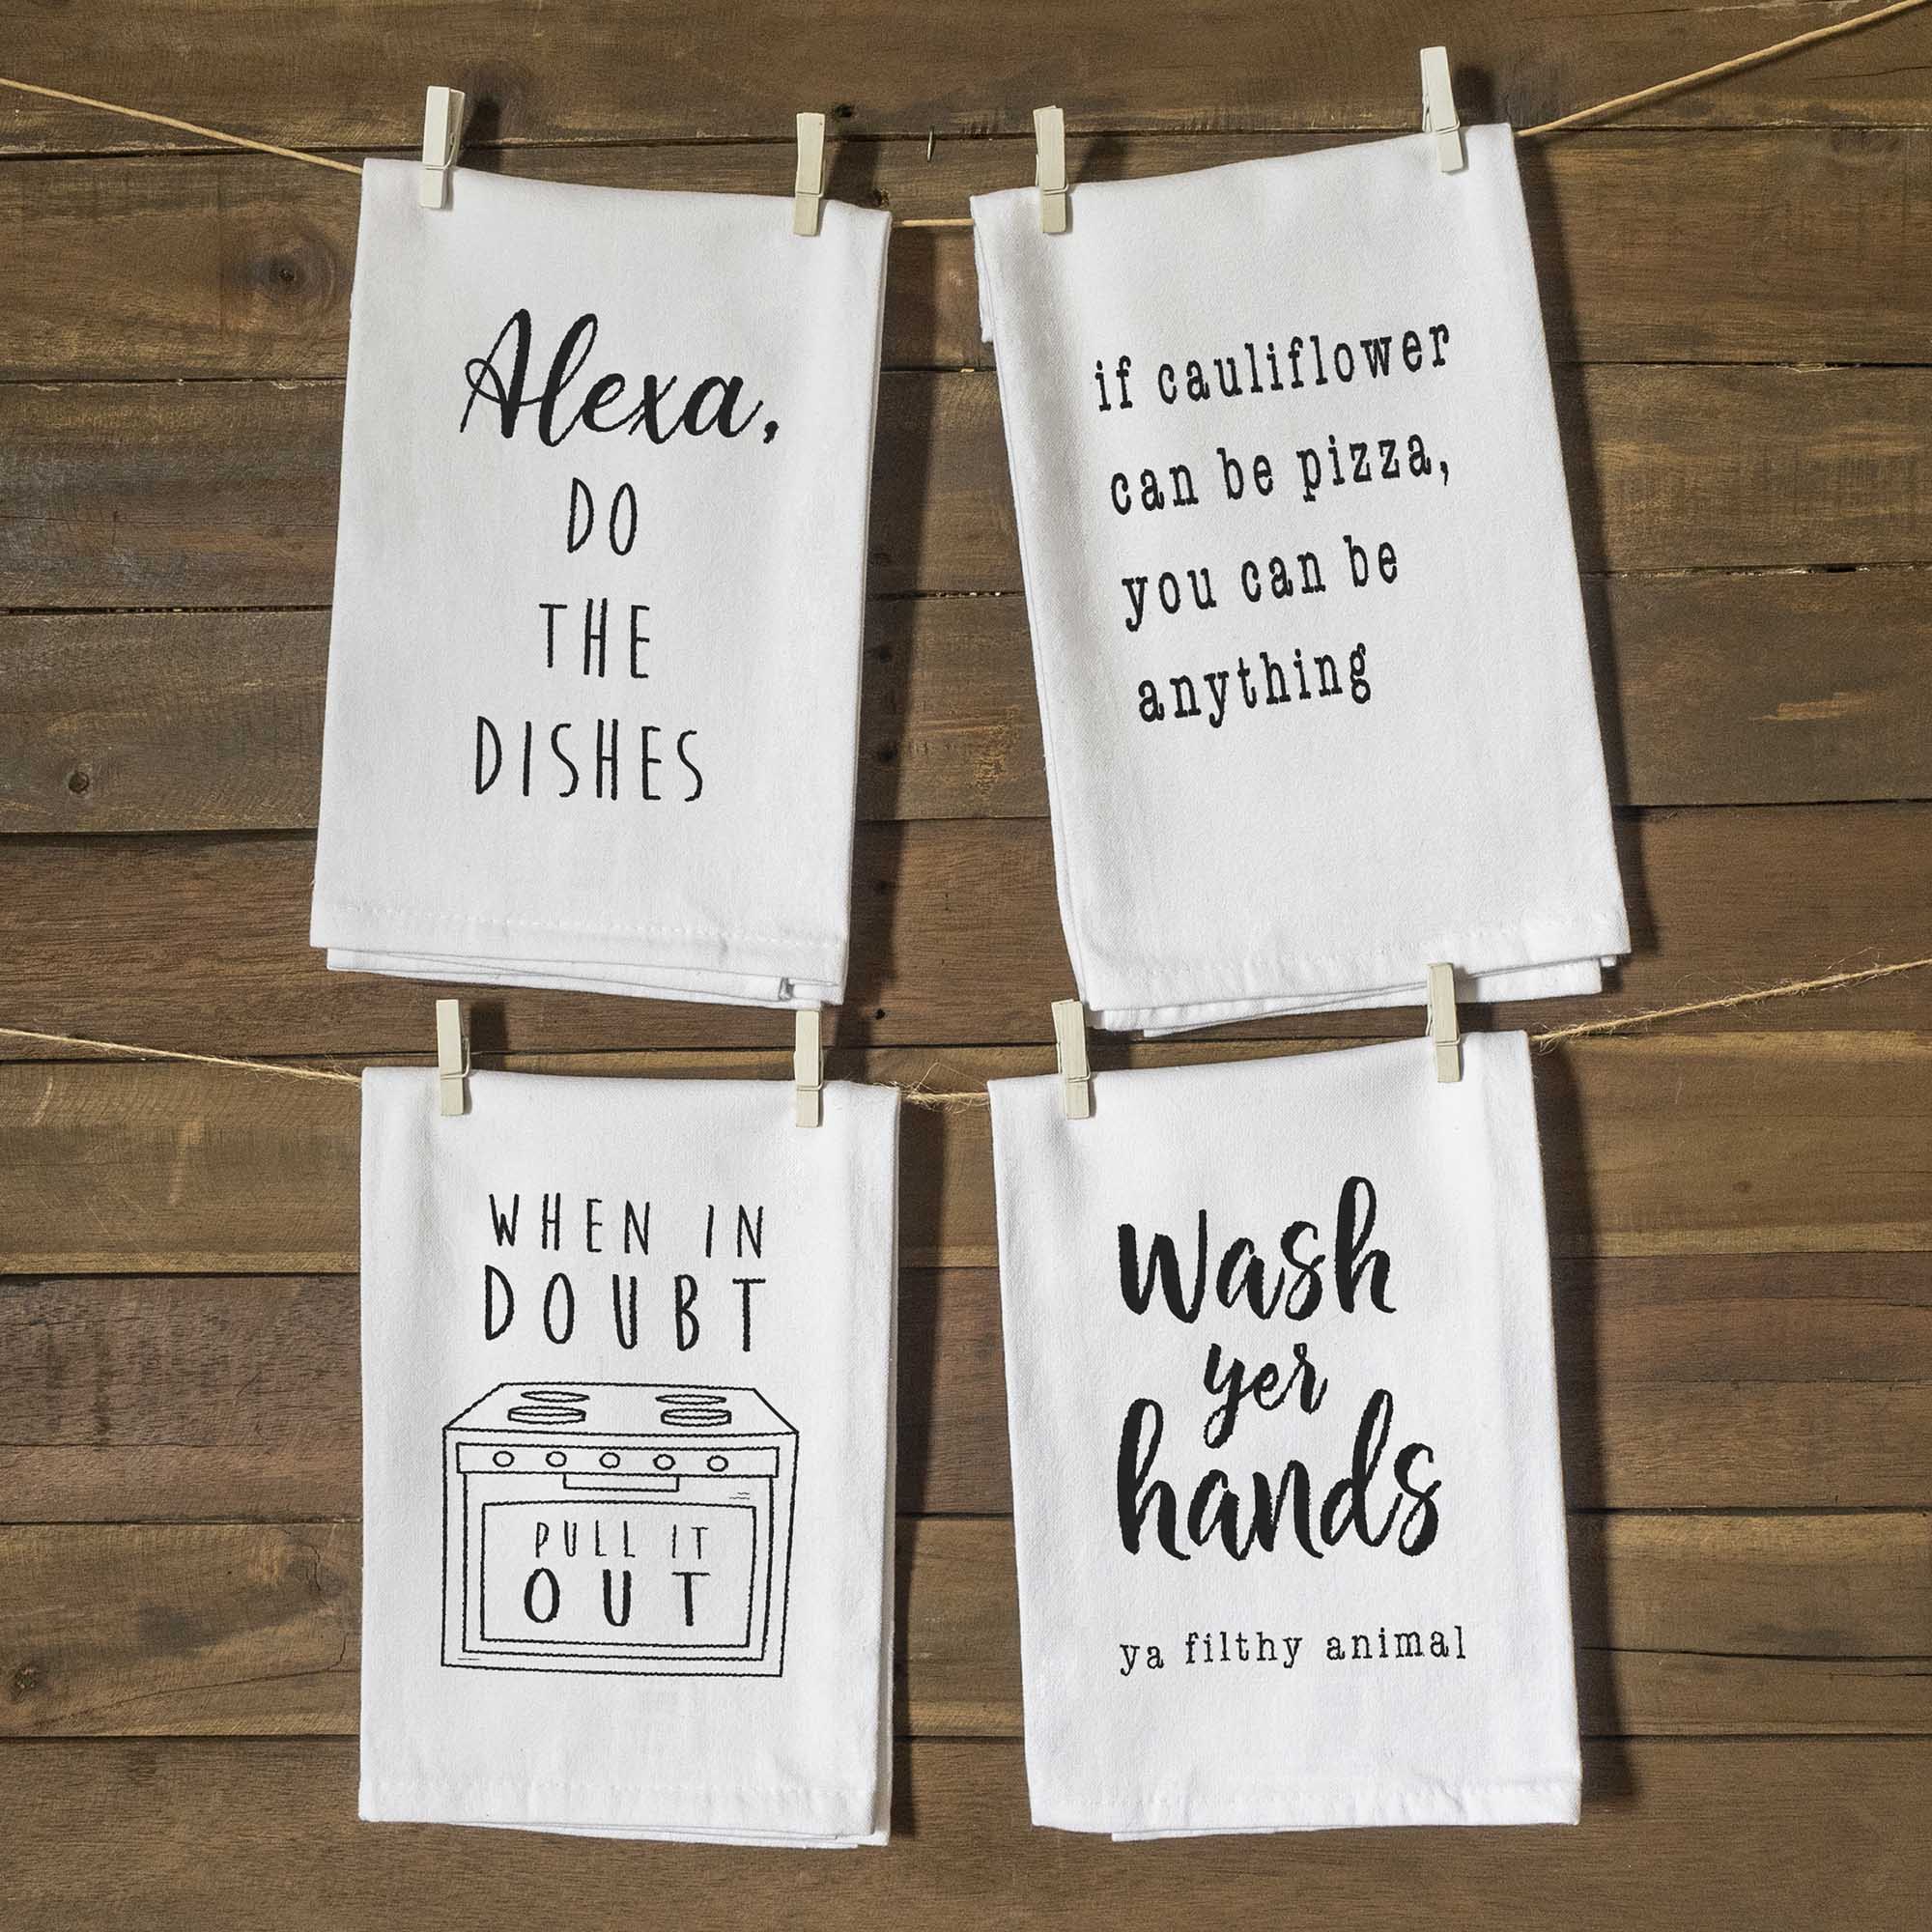 https://maineventusa.shop/cdn/shop/products/towels_LS_4pack_01_funny-kitchen-towel-4-pack-18x24-inch-set-of-4-cute-dish-towel-saying-housewarming-gift-hand-towel-alexa-do-the-dishes-towel.jpg?v=1678897144